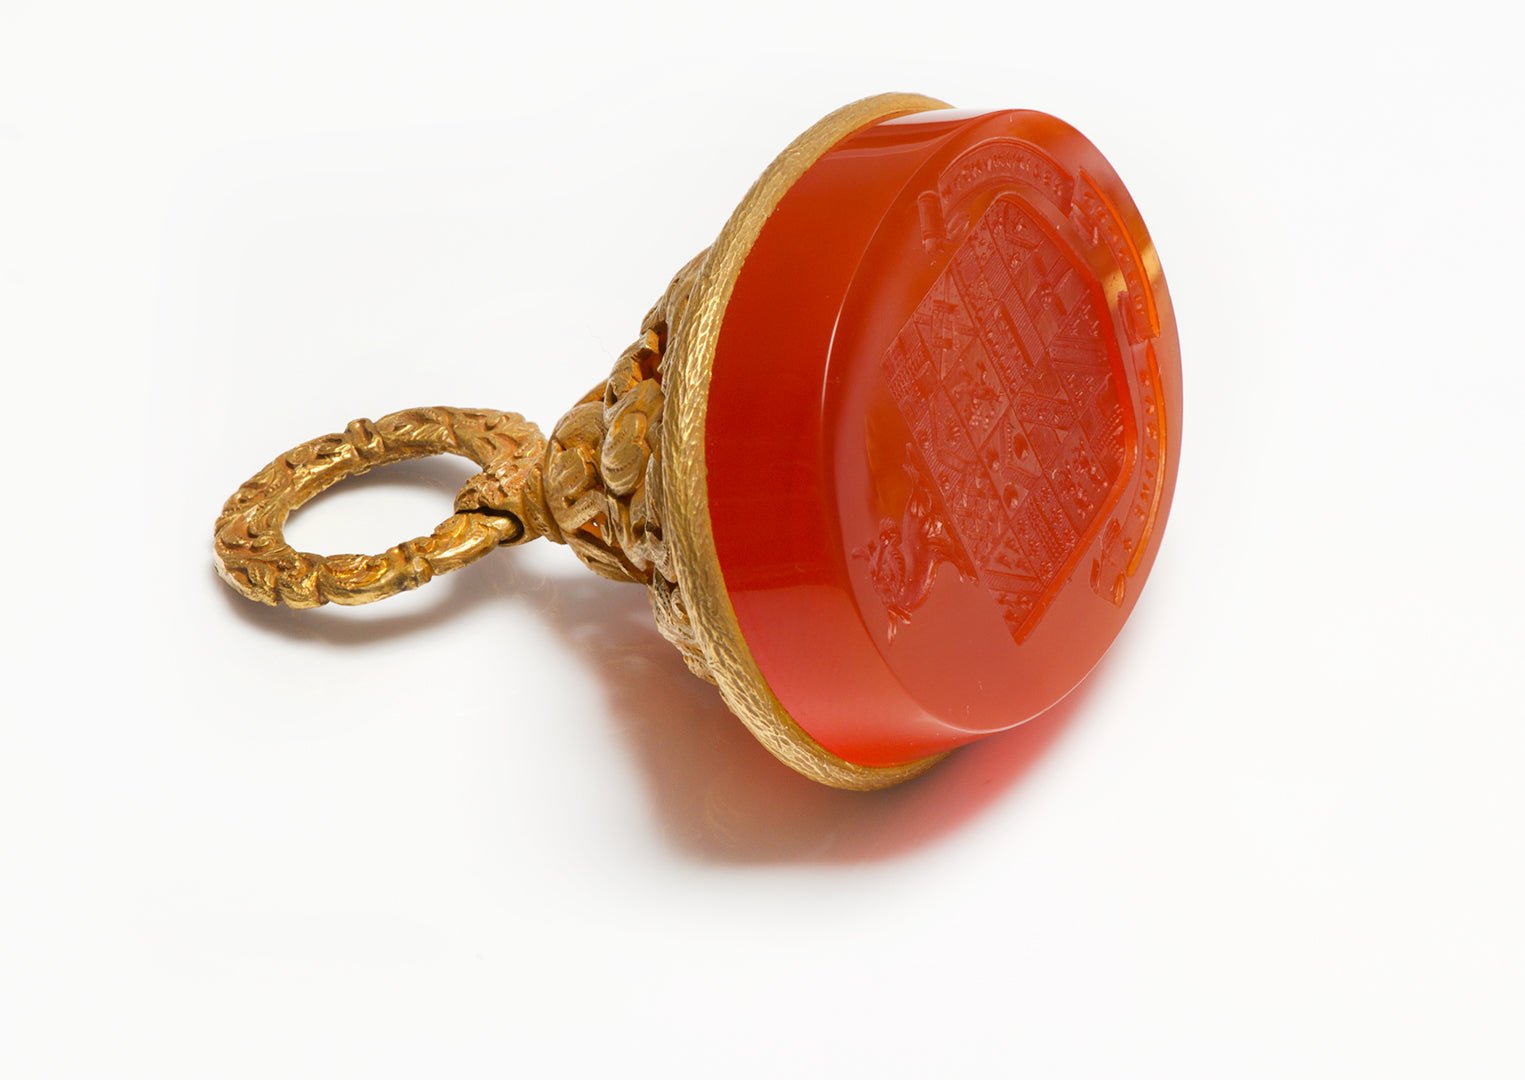 Antique Phenomenal Carved Gold Carnelian Crest Seal Fob